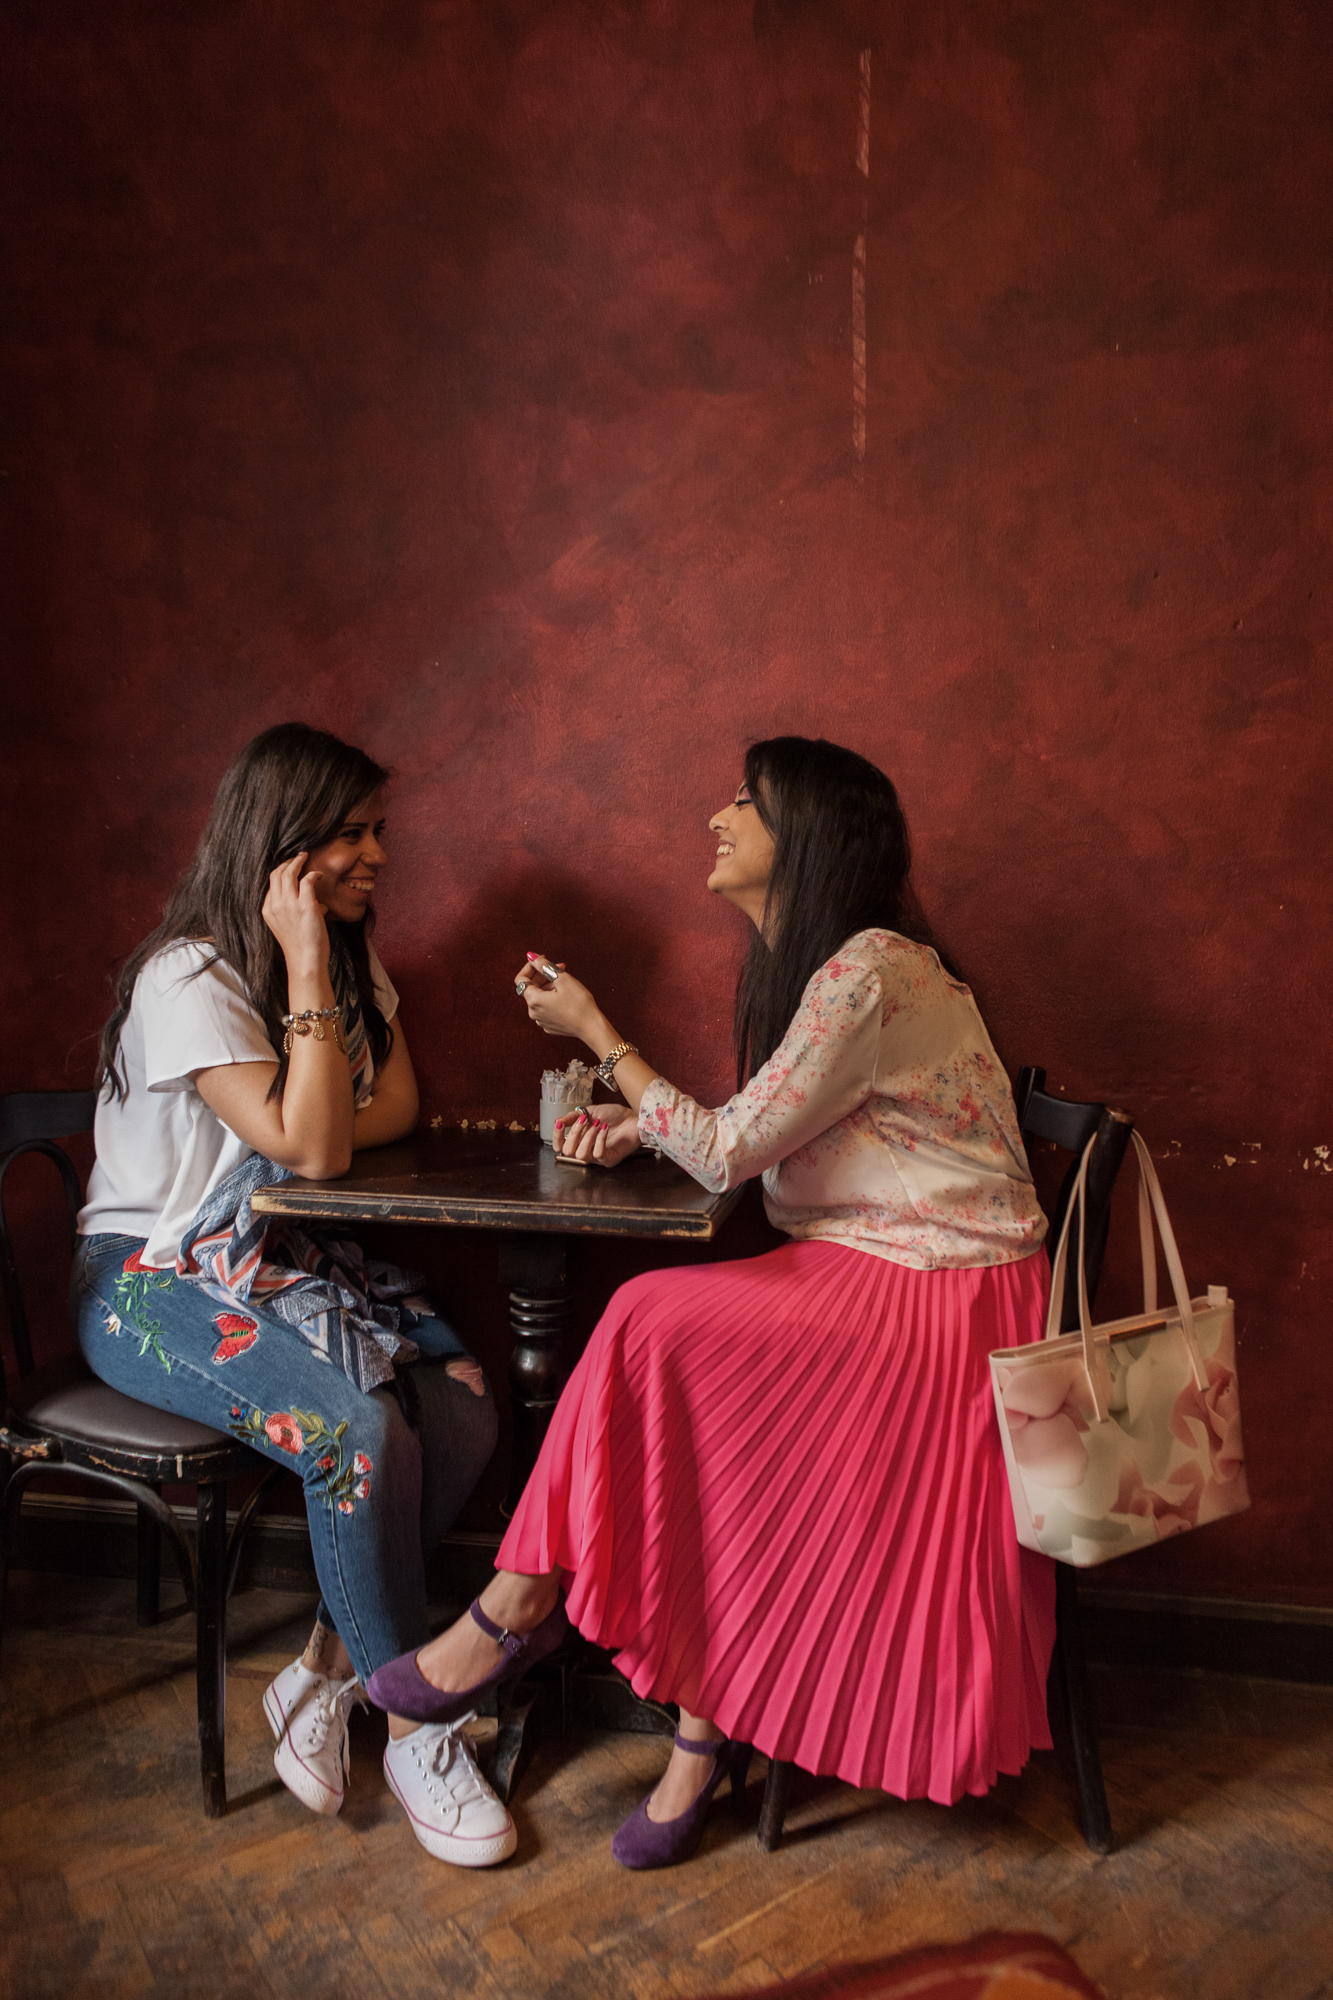 Reportage on Single Women in Egypt, for Annabelle Magazine